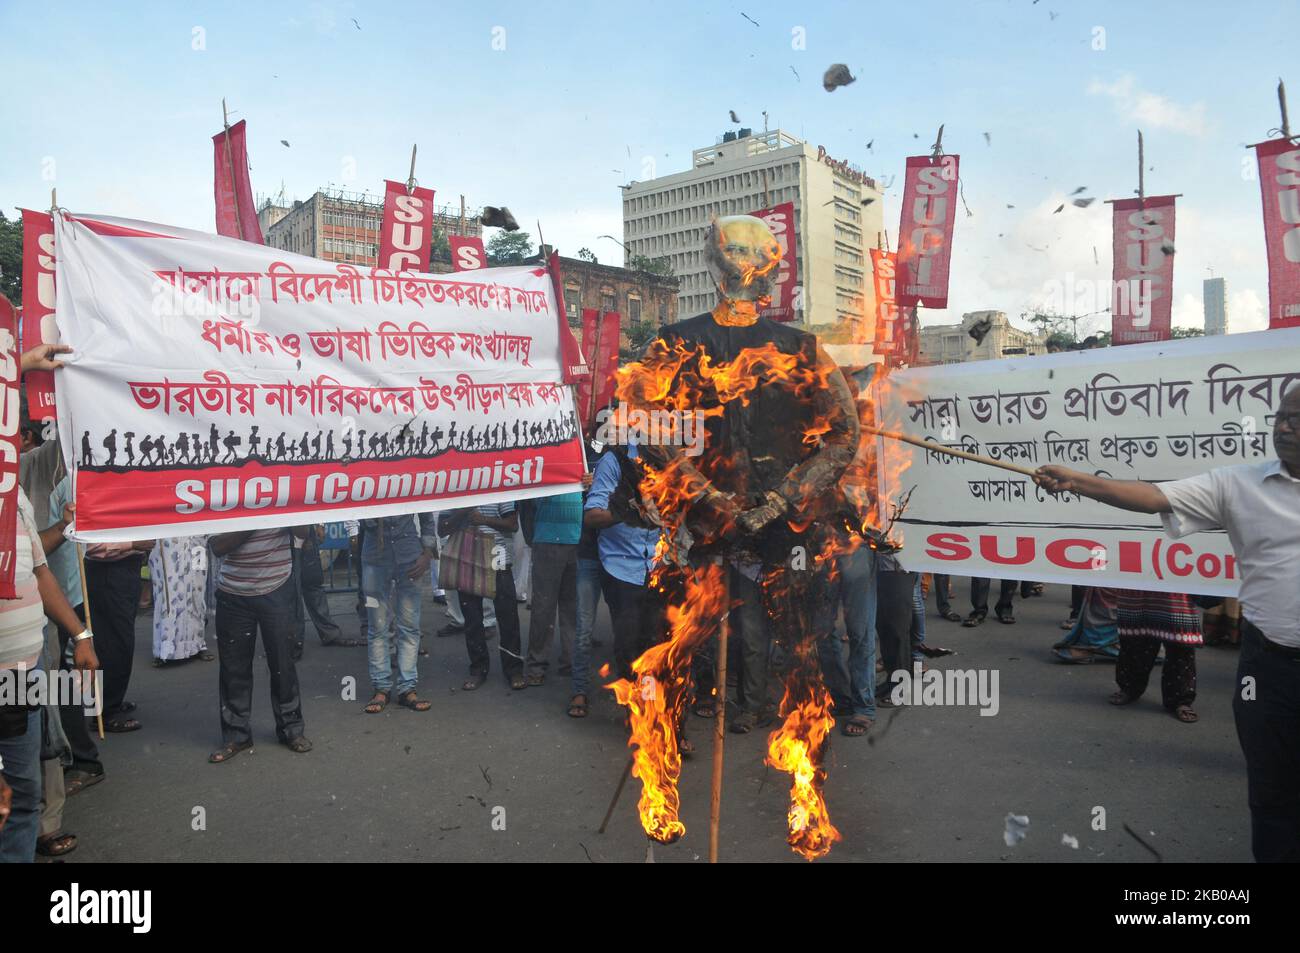 The Socialist Unity Centre of India (Communist) SUCI Political party activists hold posters and burn an effigy of Indian Prime Minister Narendra Modi during a protest following the publication of a draft of the National Register of Citizens (NRC) in Kolkata on August 08, 2018. India on July 30 stripped four million people of citizenship in the northeastern state of Assam, under a draft list that has sparked fears of deportation of largely Bengali-speaking Muslims. Critics say it is the latest move by right-wing Prime Minister Narendra Modi to advance the rights of India's Hindu majority at the Stock Photo